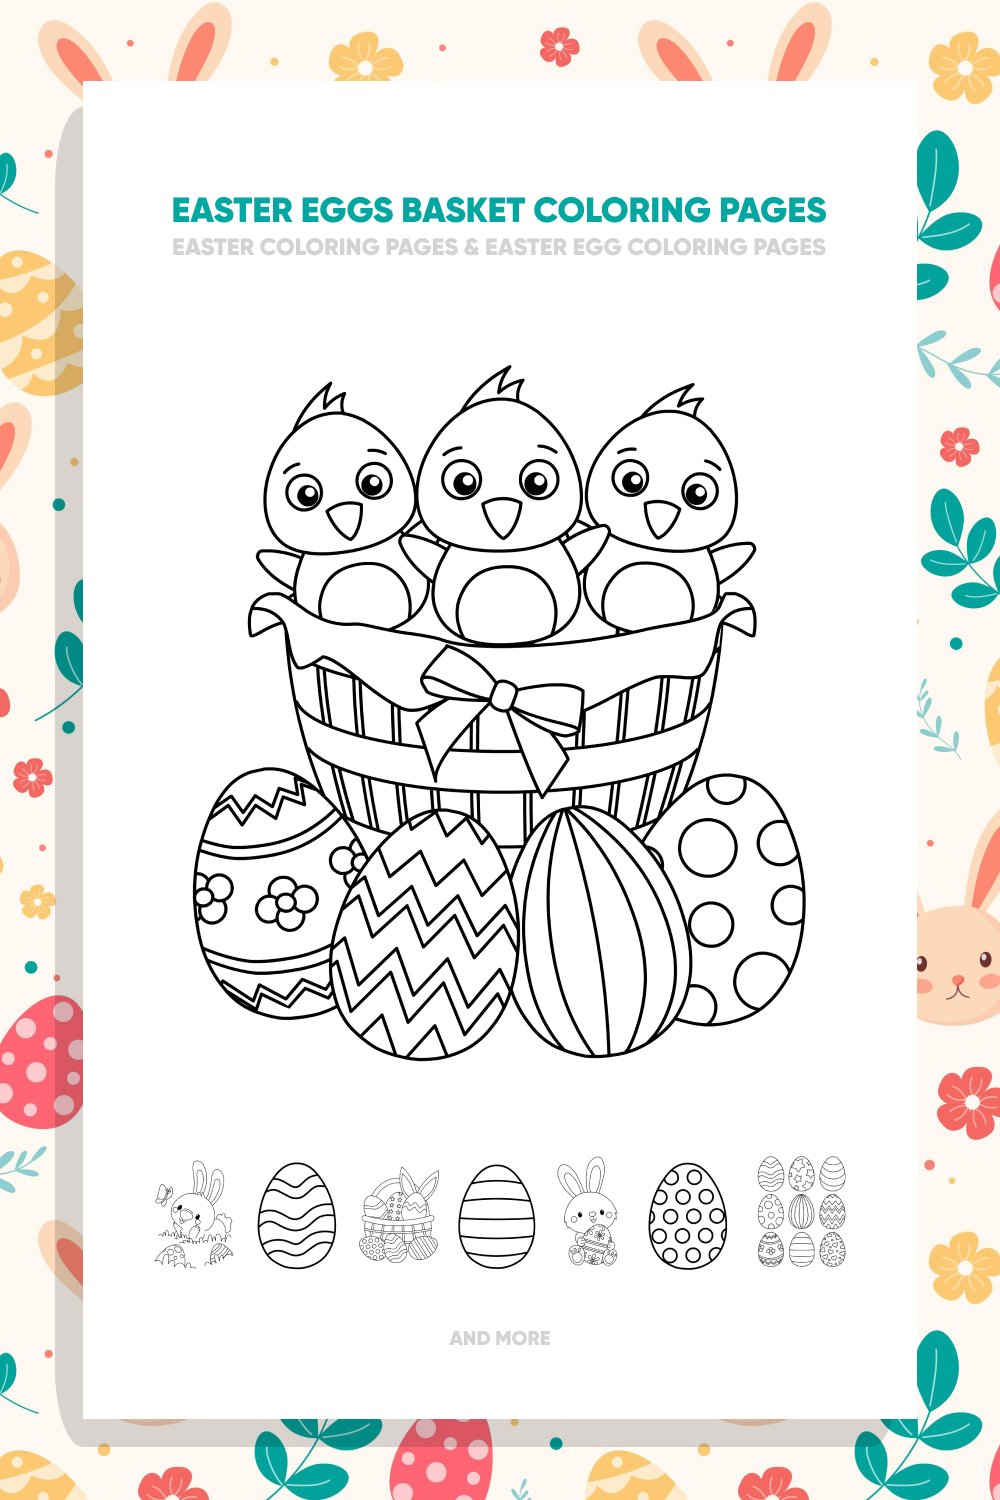 Easter Eggs Basket Coloring Pages pinterest image.